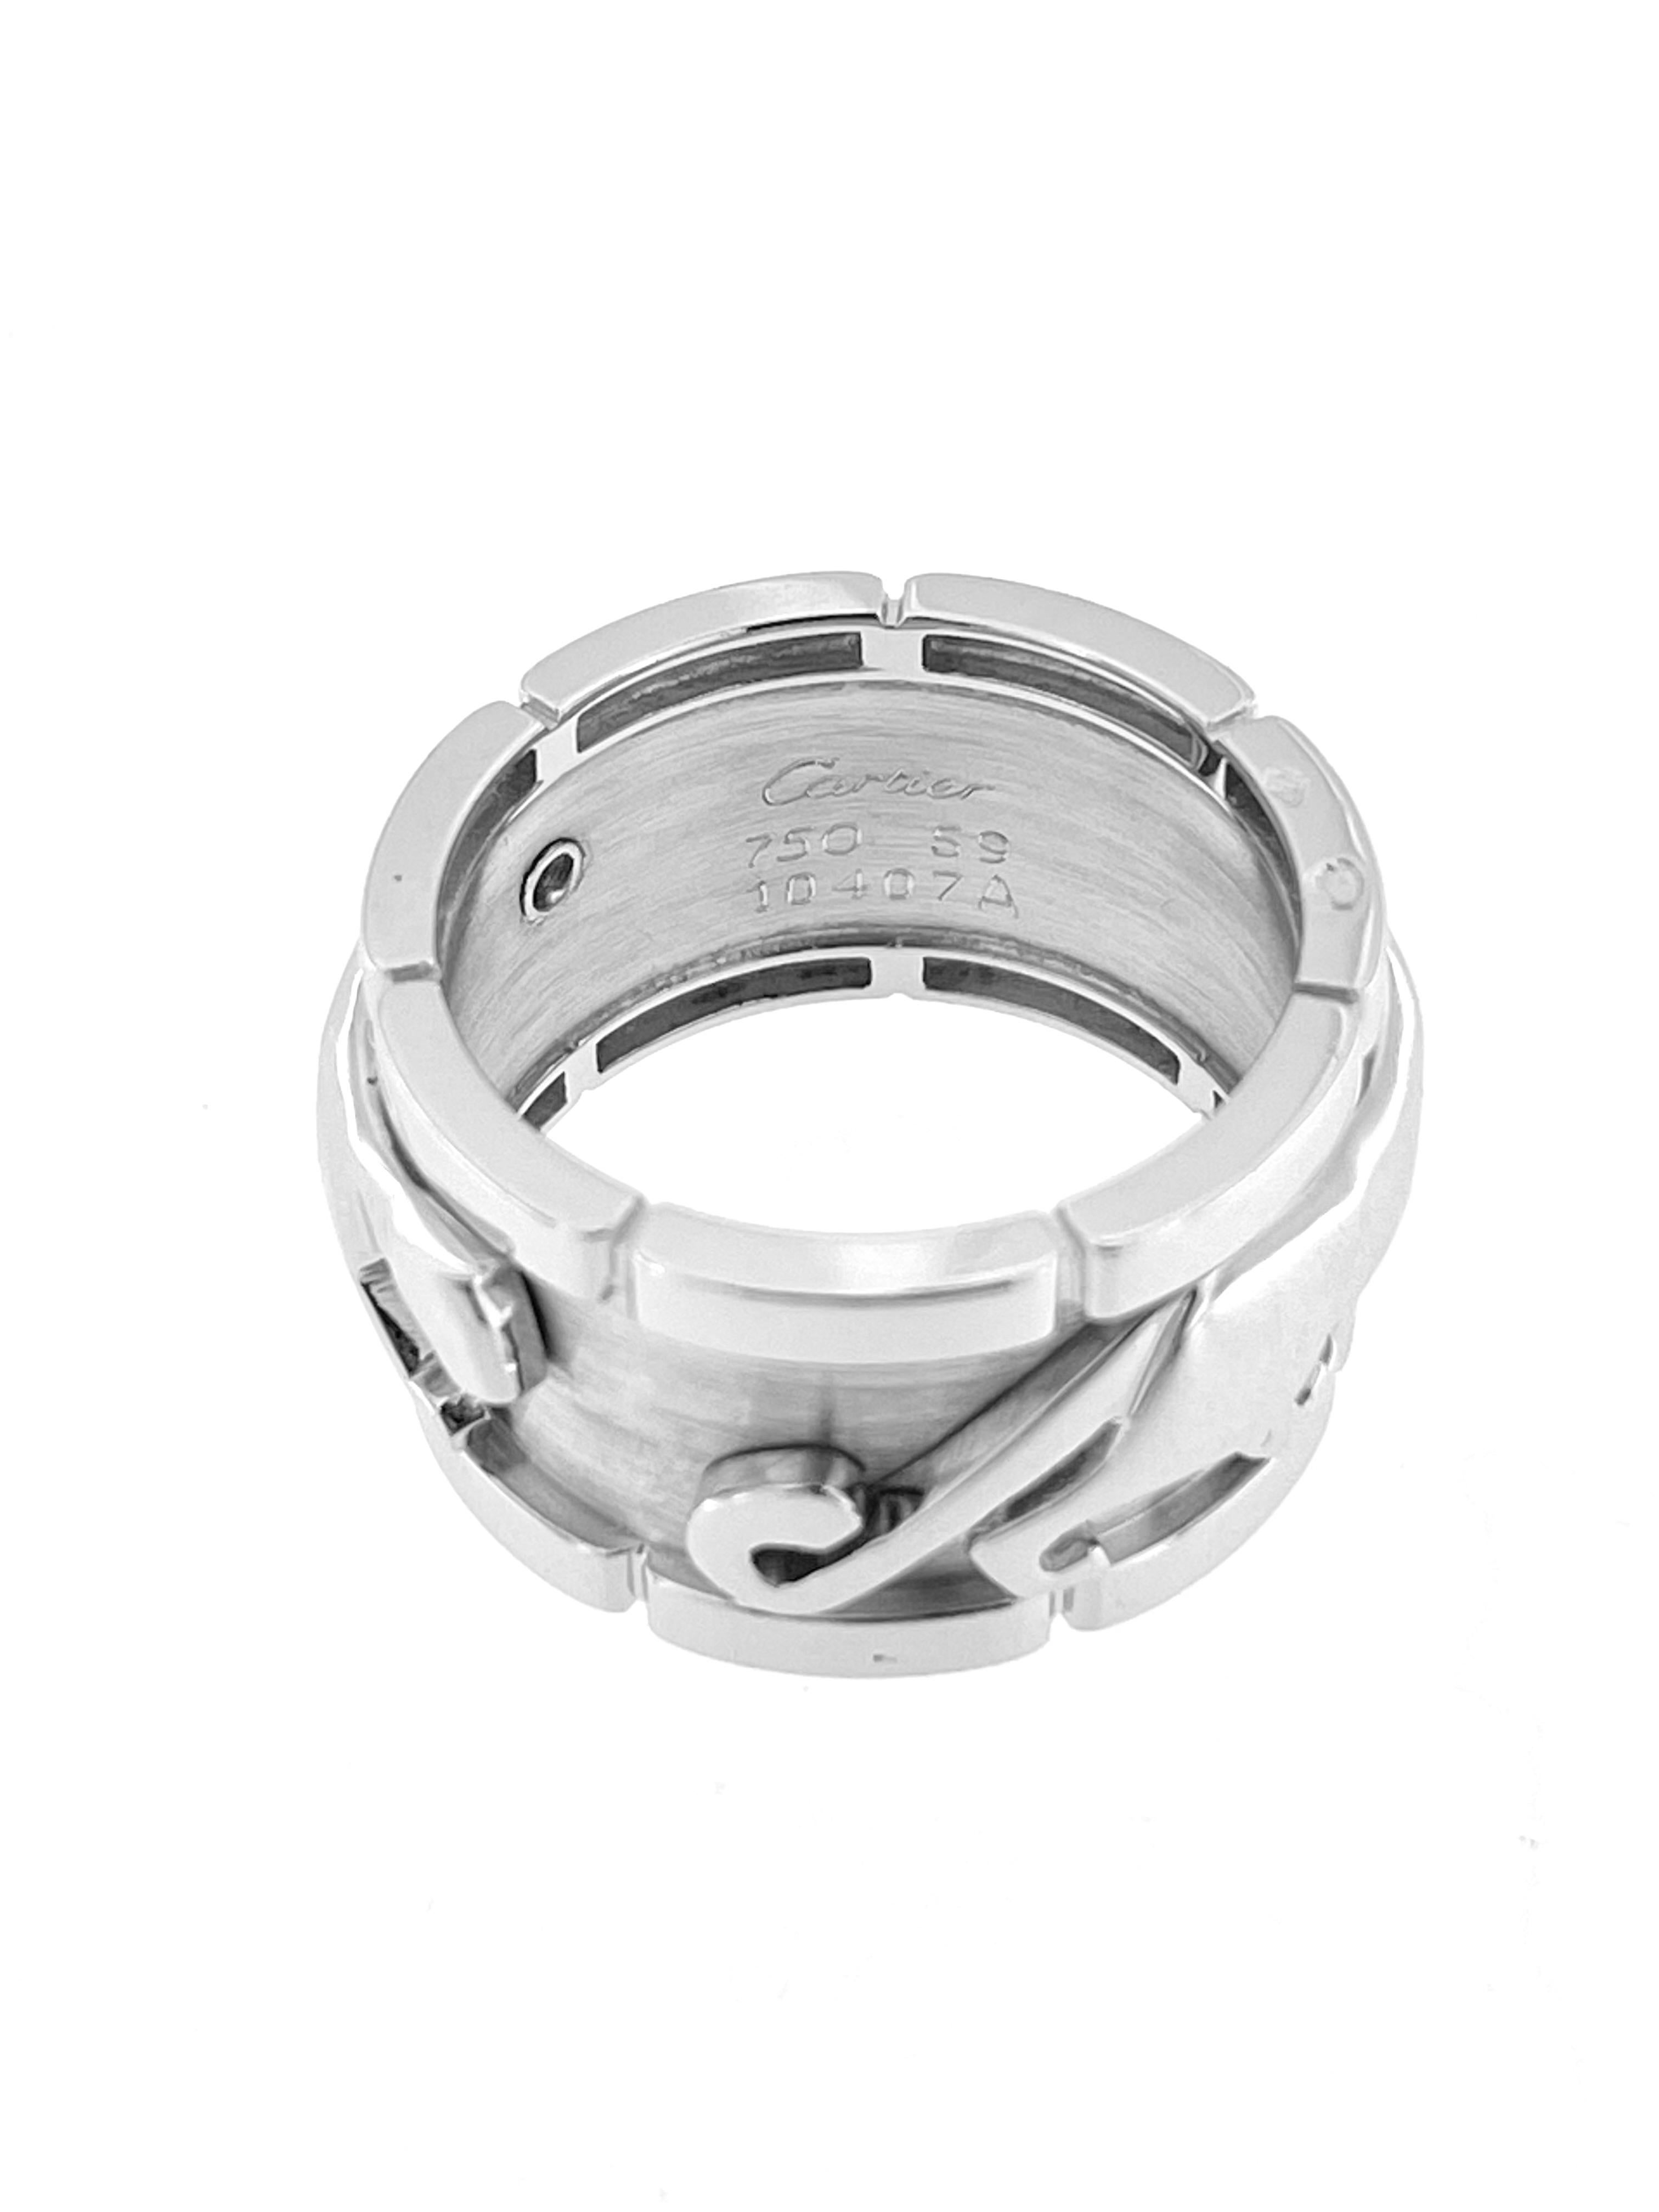 Modern Cartier Walking Panthere Mahango Band Ring White Gold For Sale